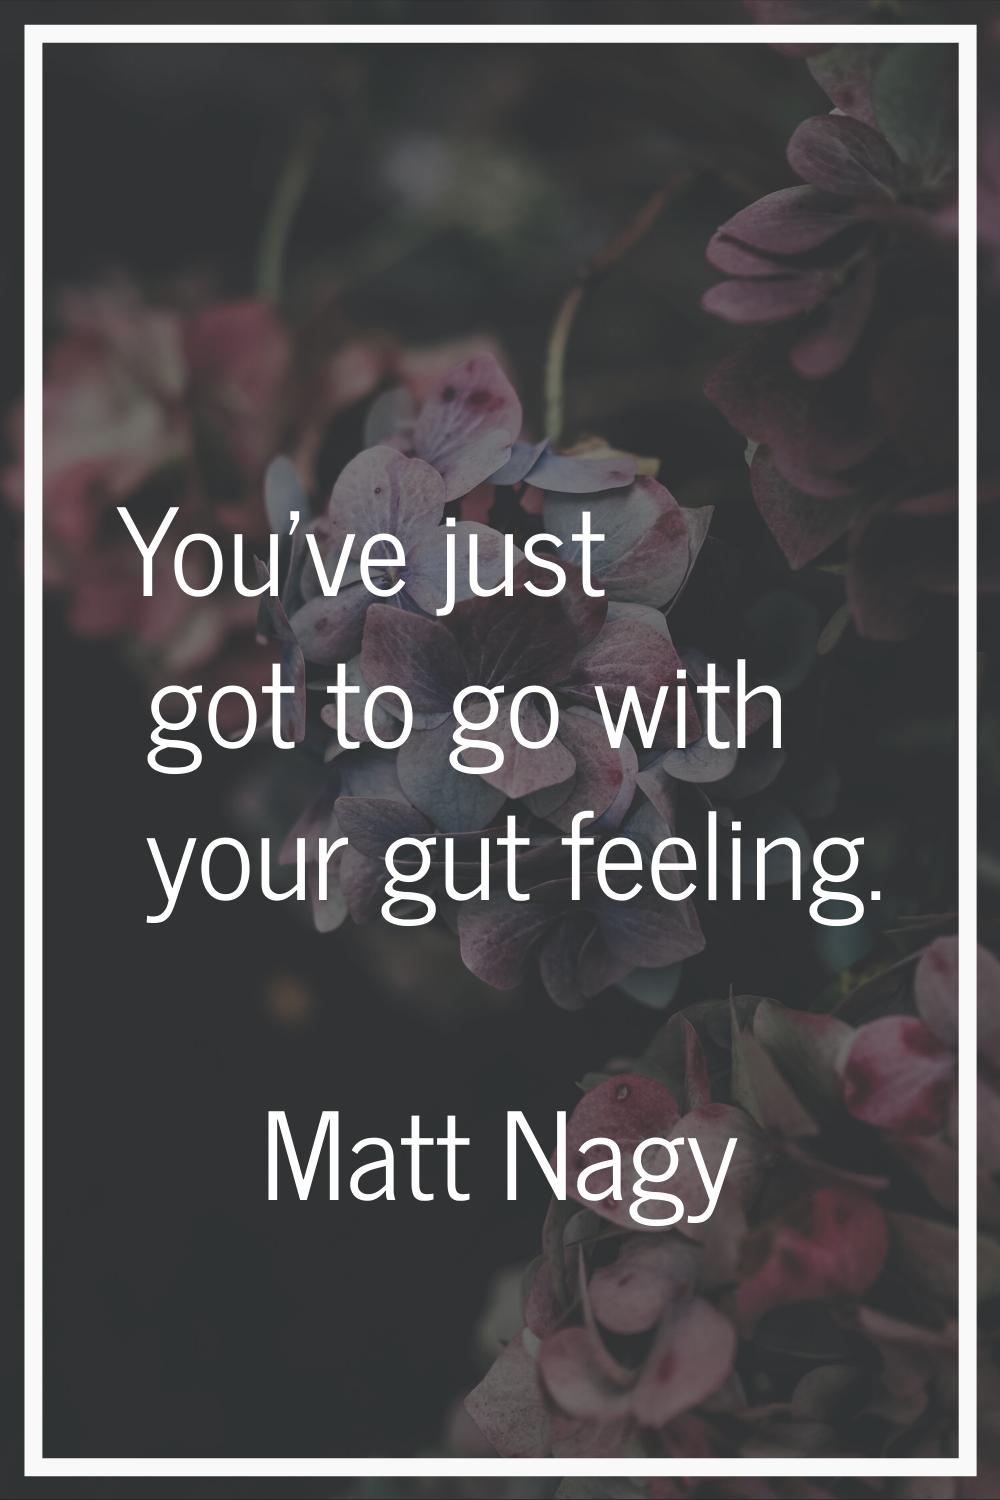 You've just got to go with your gut feeling.